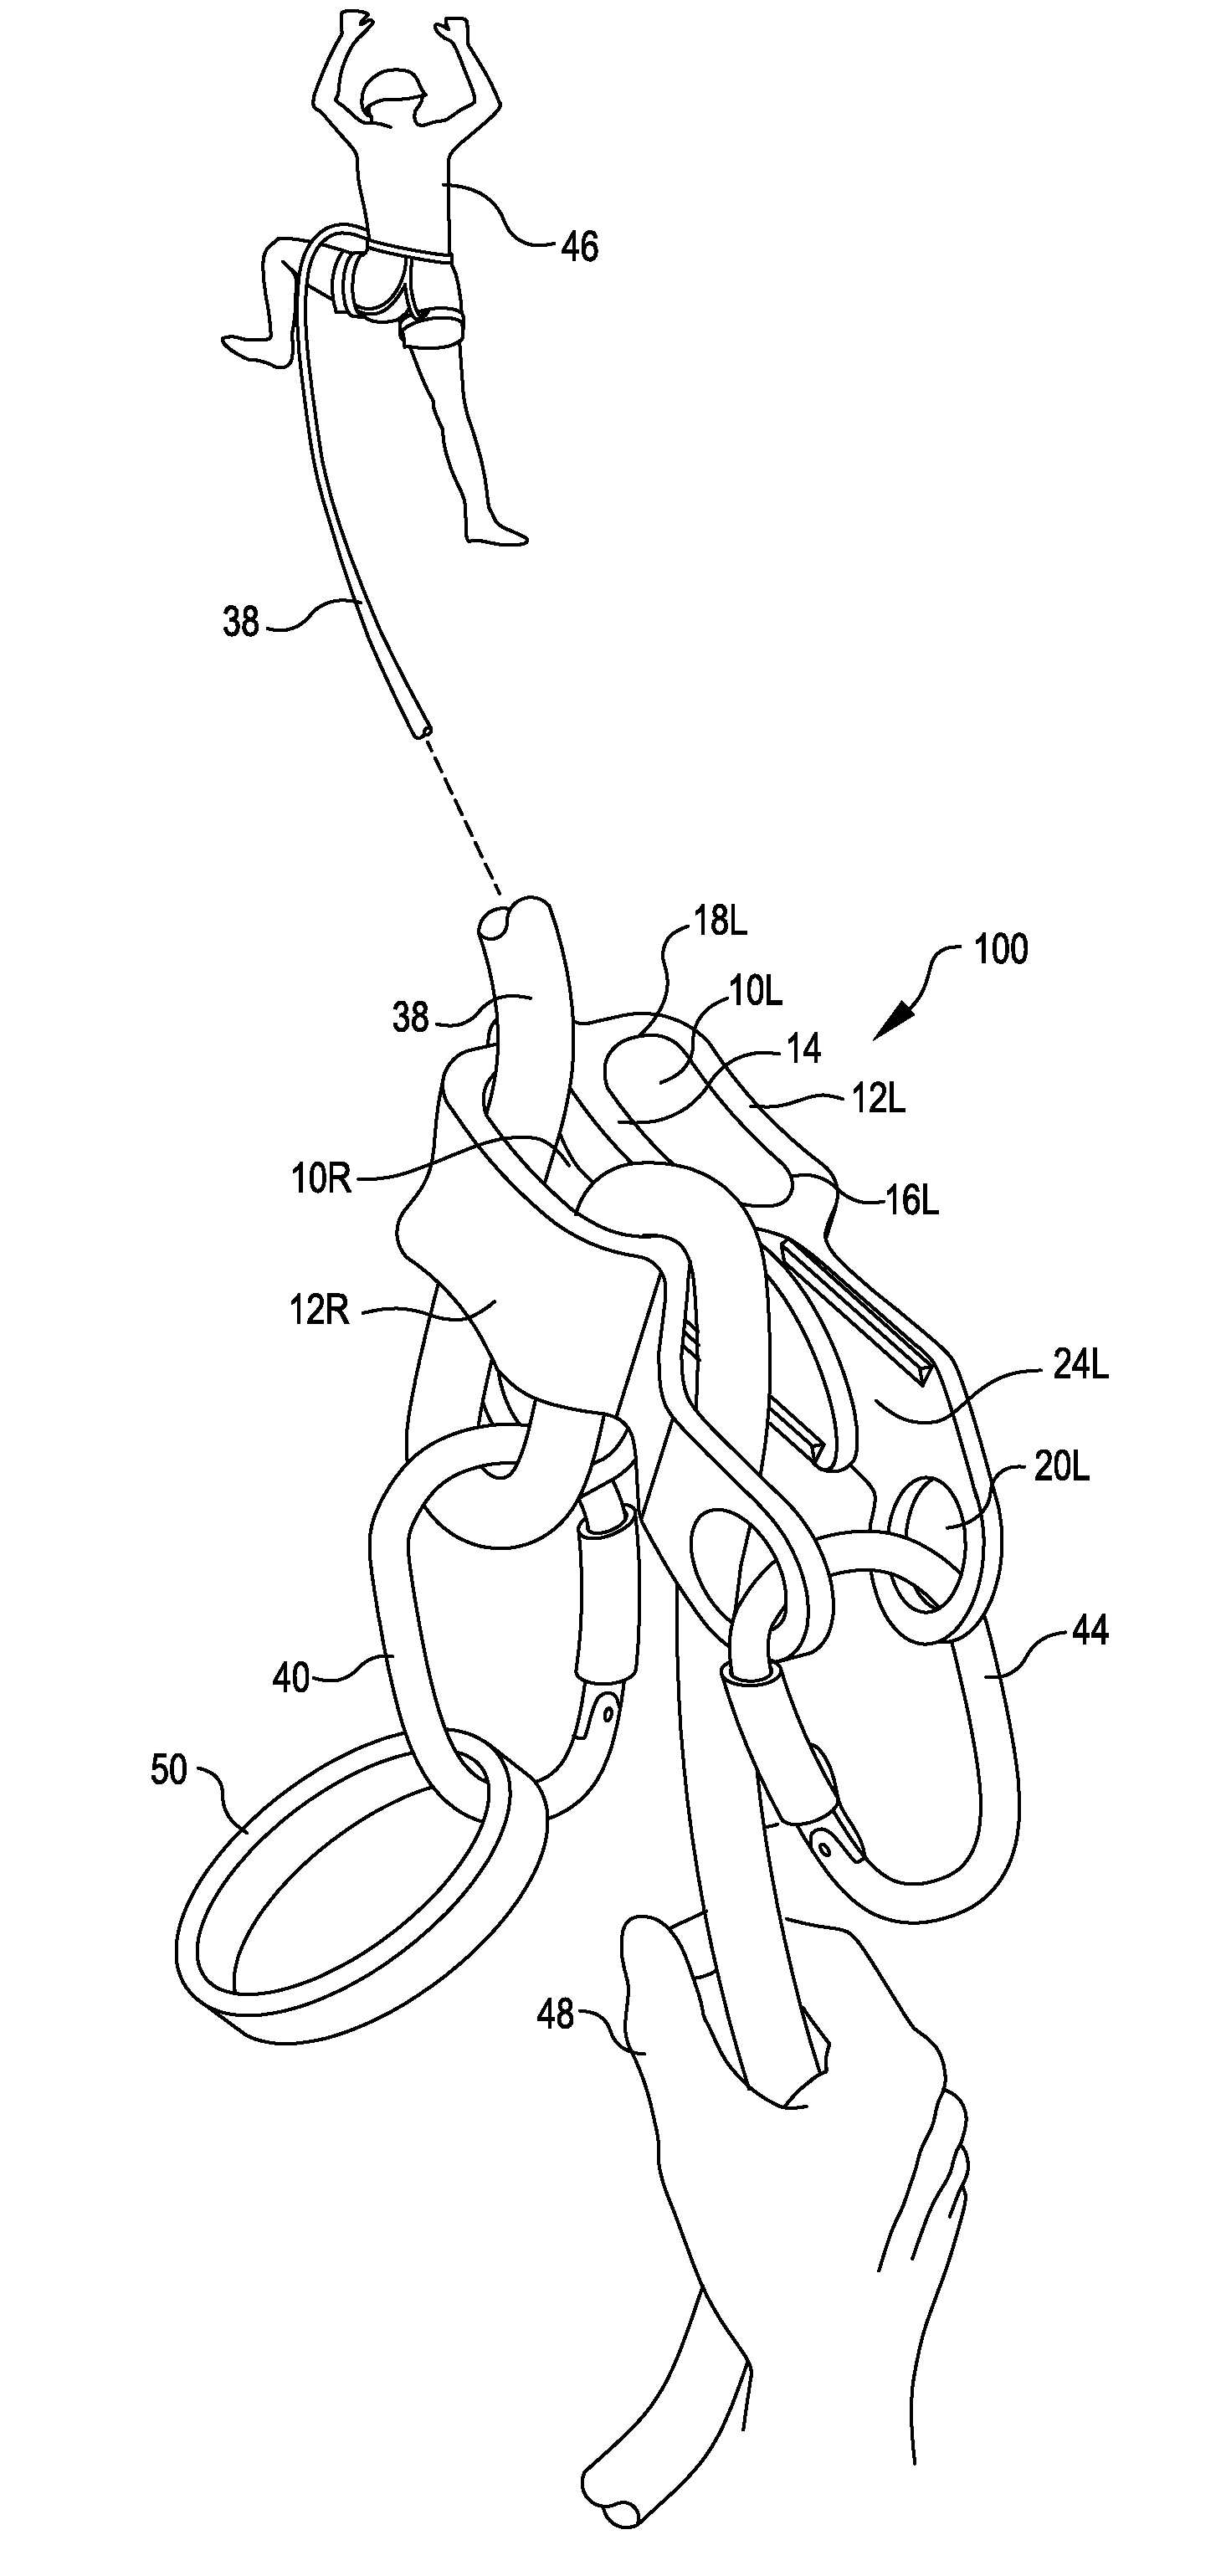 Rope handling device with secondary locking feature